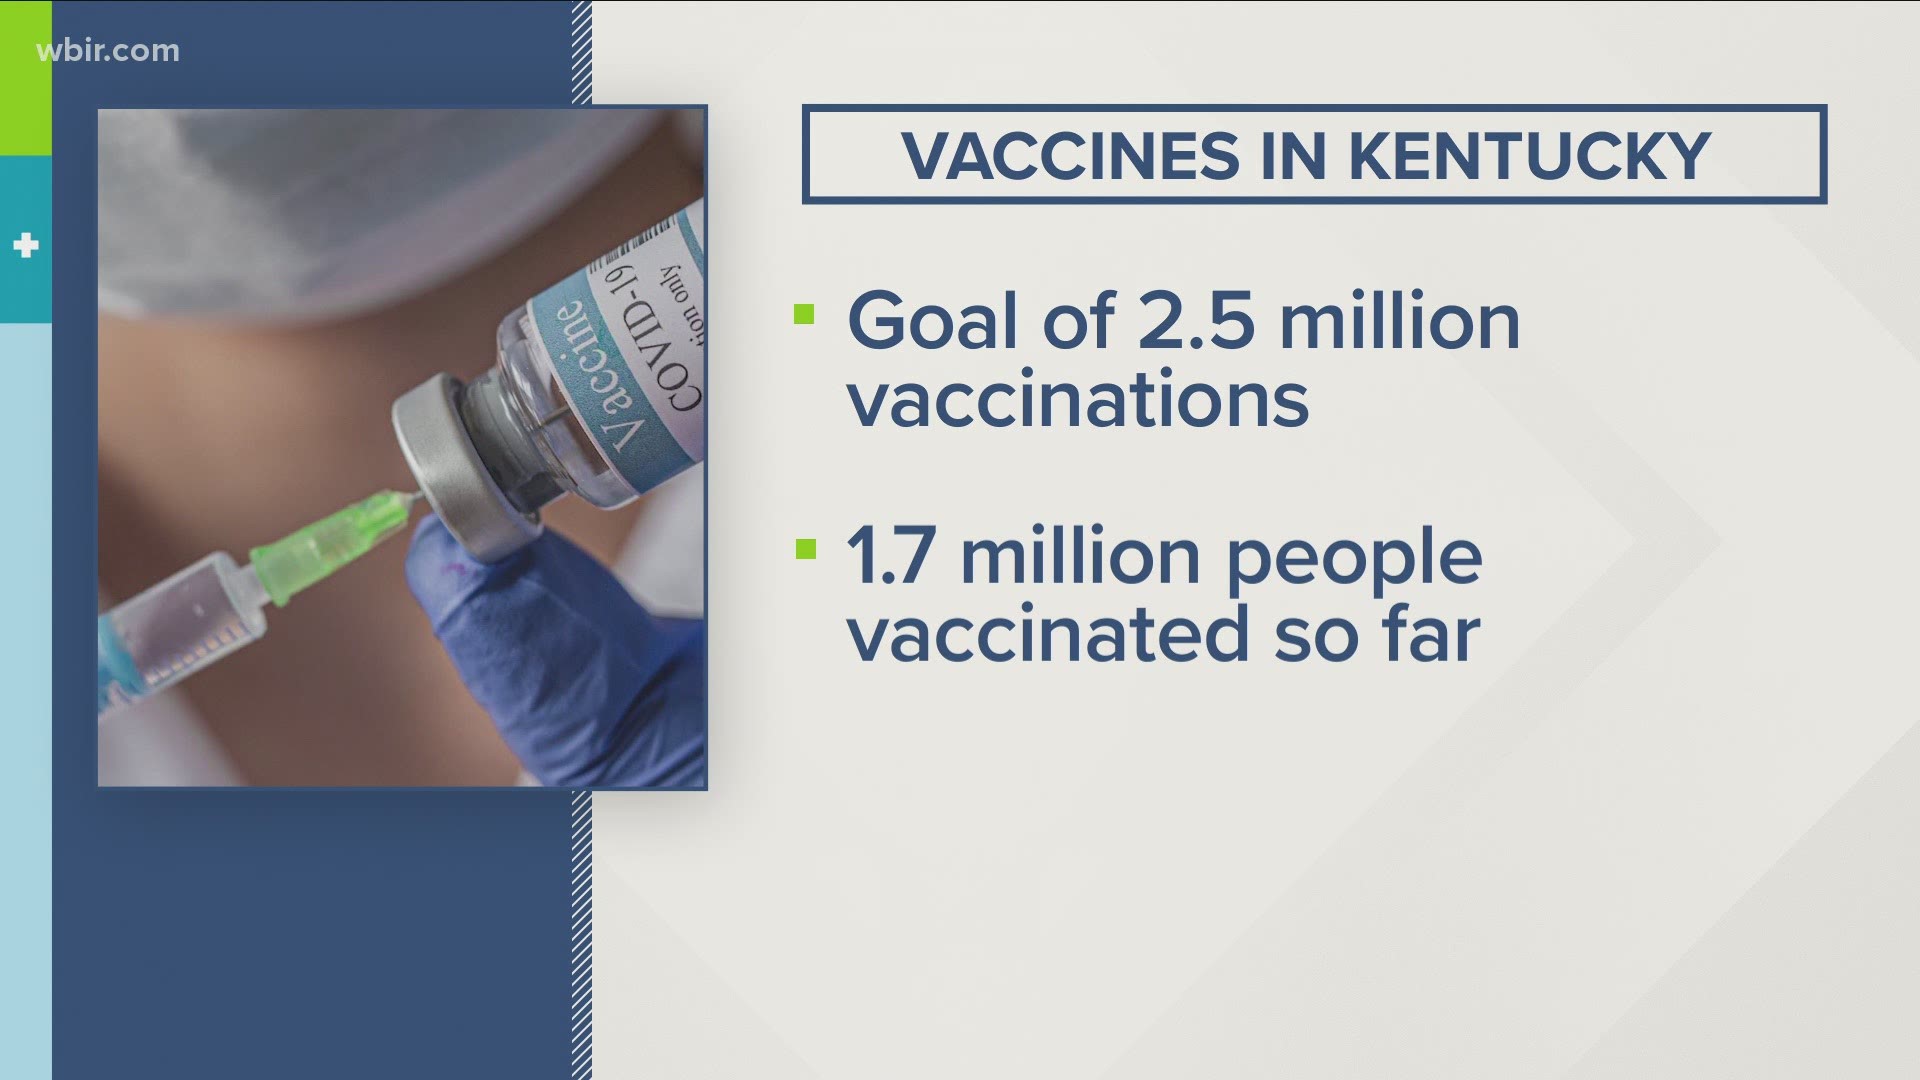 Kentucky Governor Andy Beshear said he is standing by his goal of 2-and-a-half million vaccinations statewide.